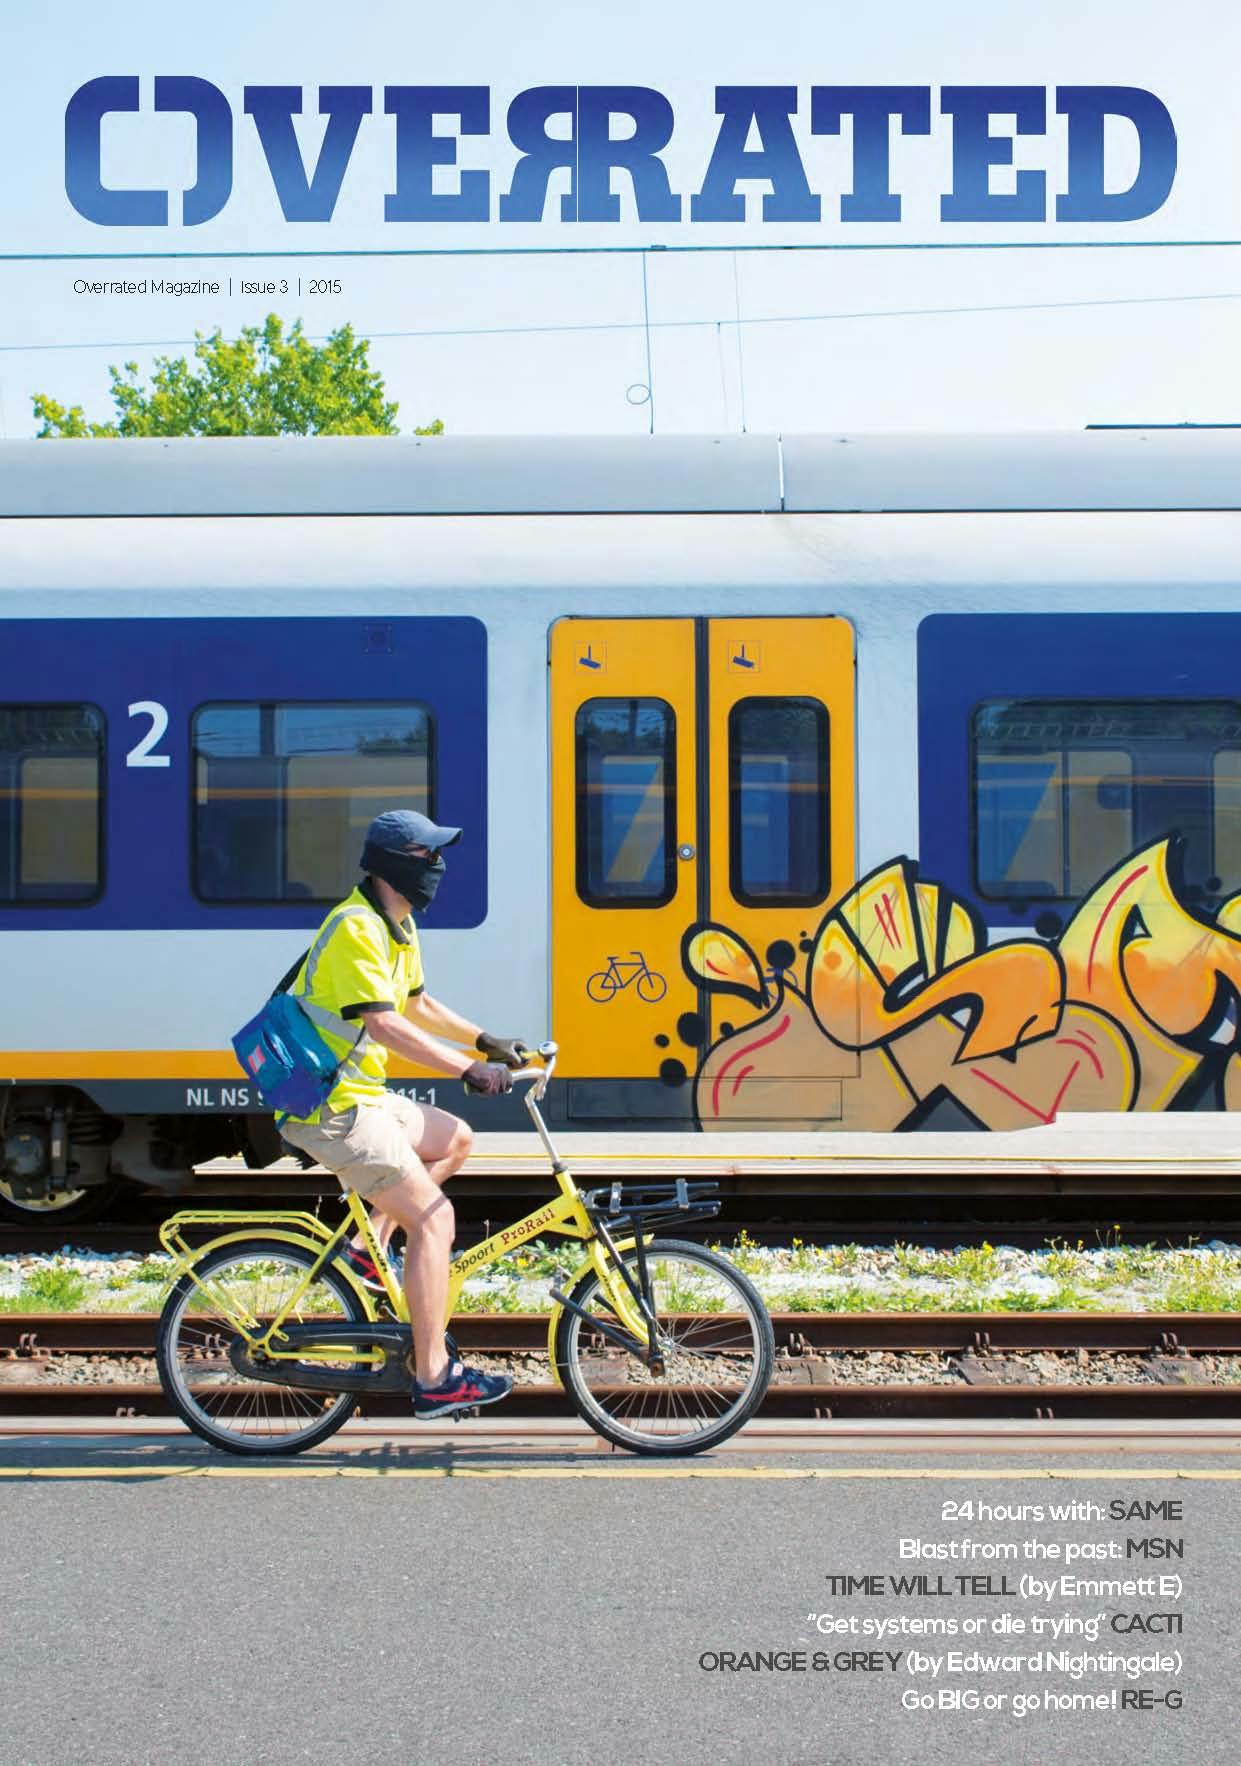 The cover of Overrated Magazine issue #3 showing someone on a railway bike in front of a painted Dutch train